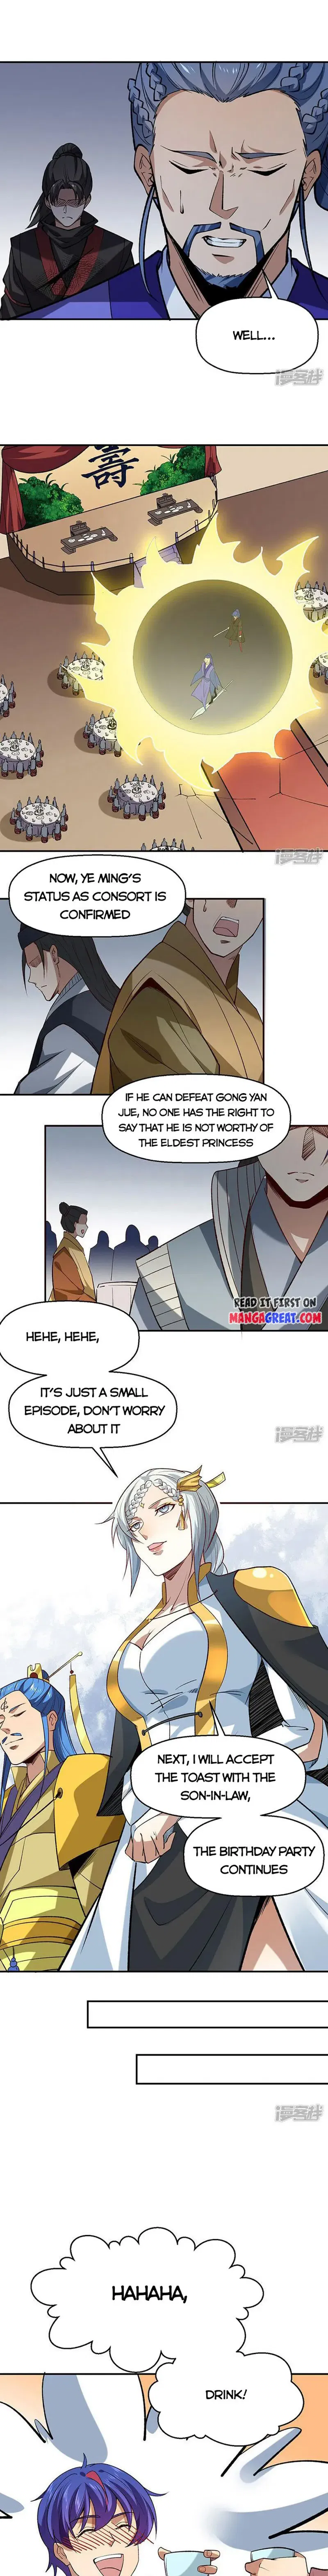 Martial Arts Reigns Chapter 543 page 5